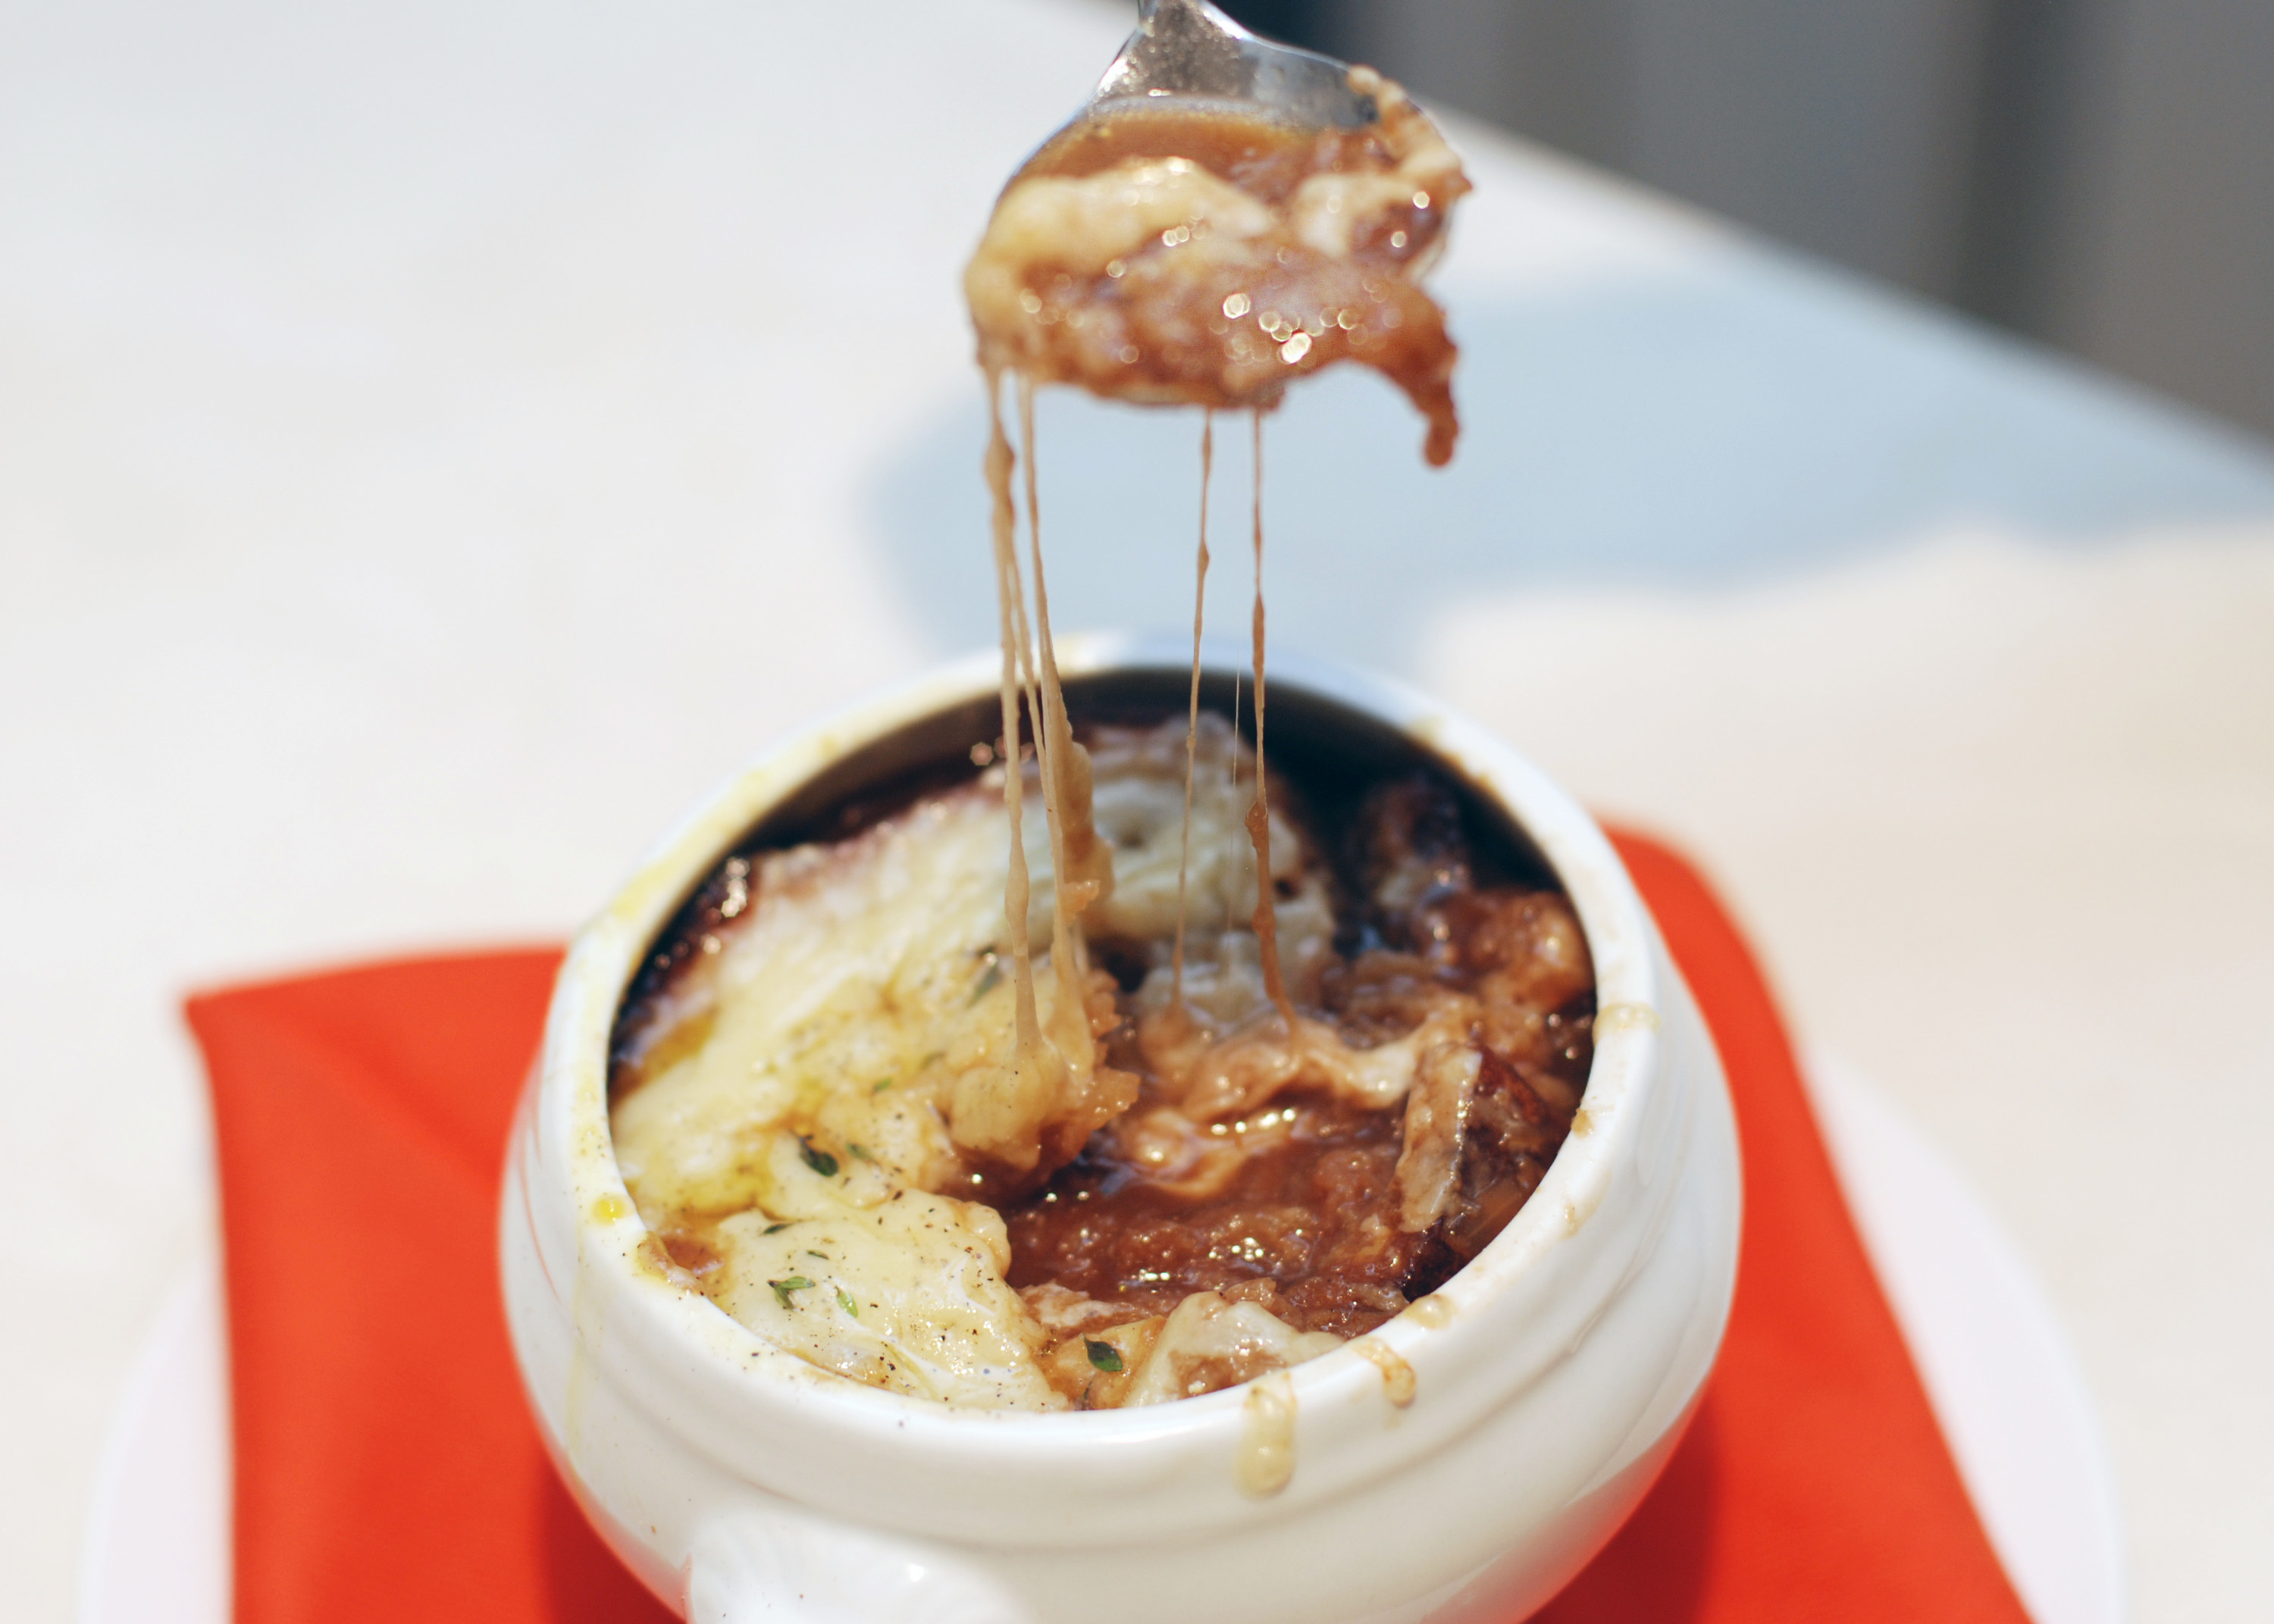 A spoon taking a bite of Balthazar copycat French onion soup from a bowl with a thick layer of cheese on top.